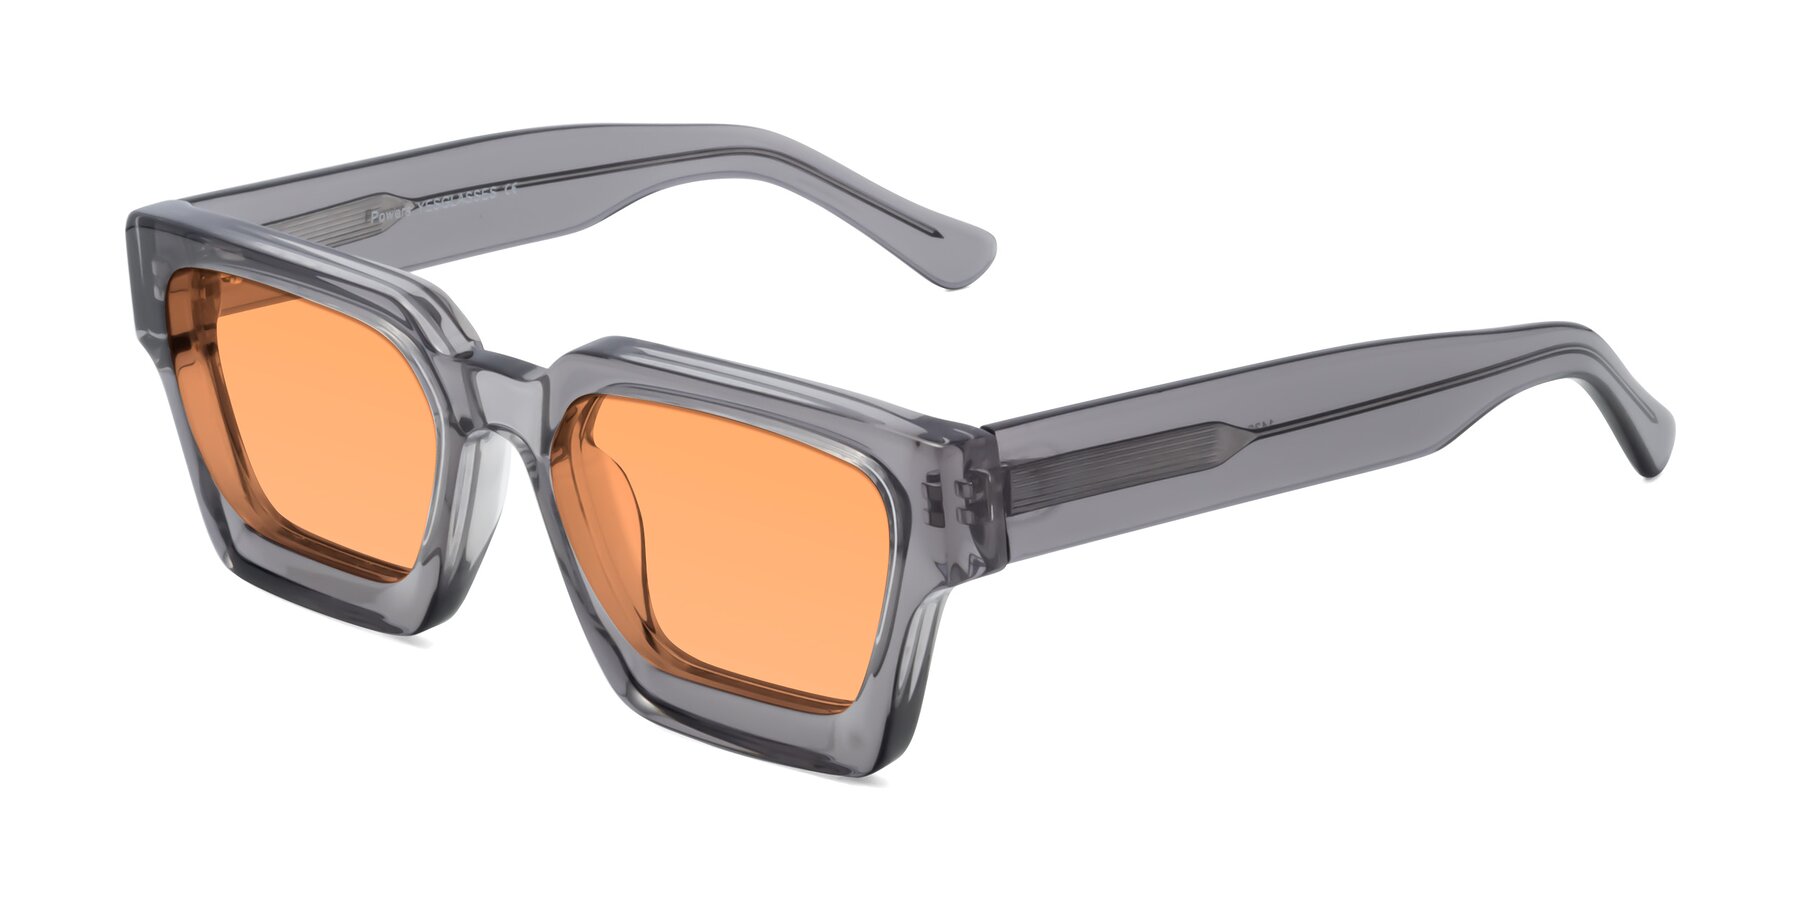 Angle of Powers in Translucent Gray with Medium Orange Tinted Lenses